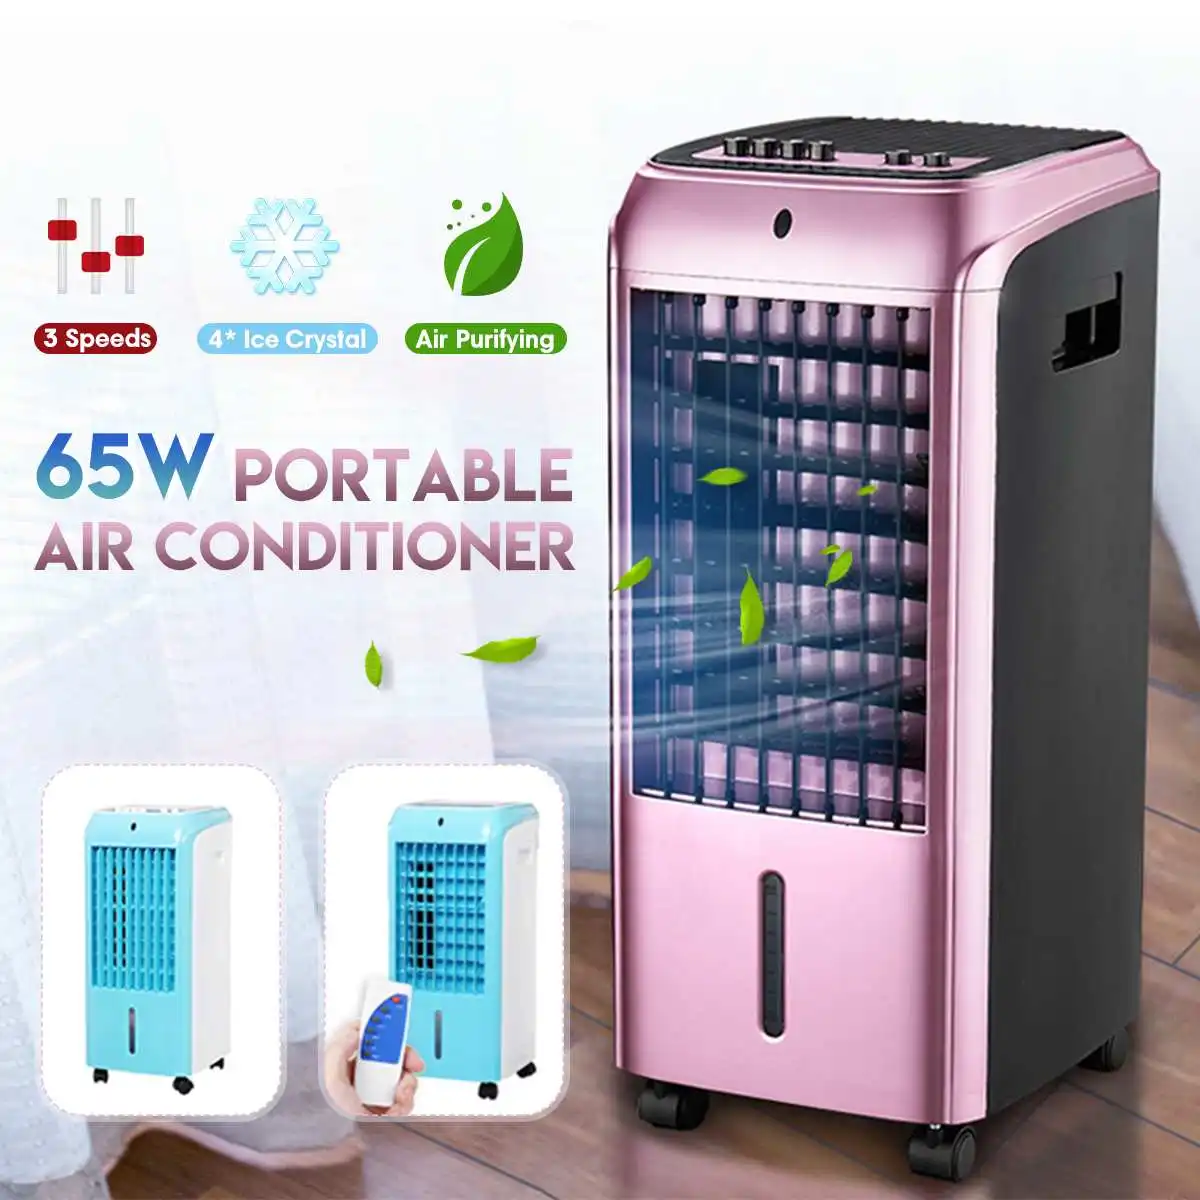 Portable Air Conditioner Conditioning 65W 220V Natural Wind Air Cooling Cooler Fan Household For Living Room New Arrival 2019